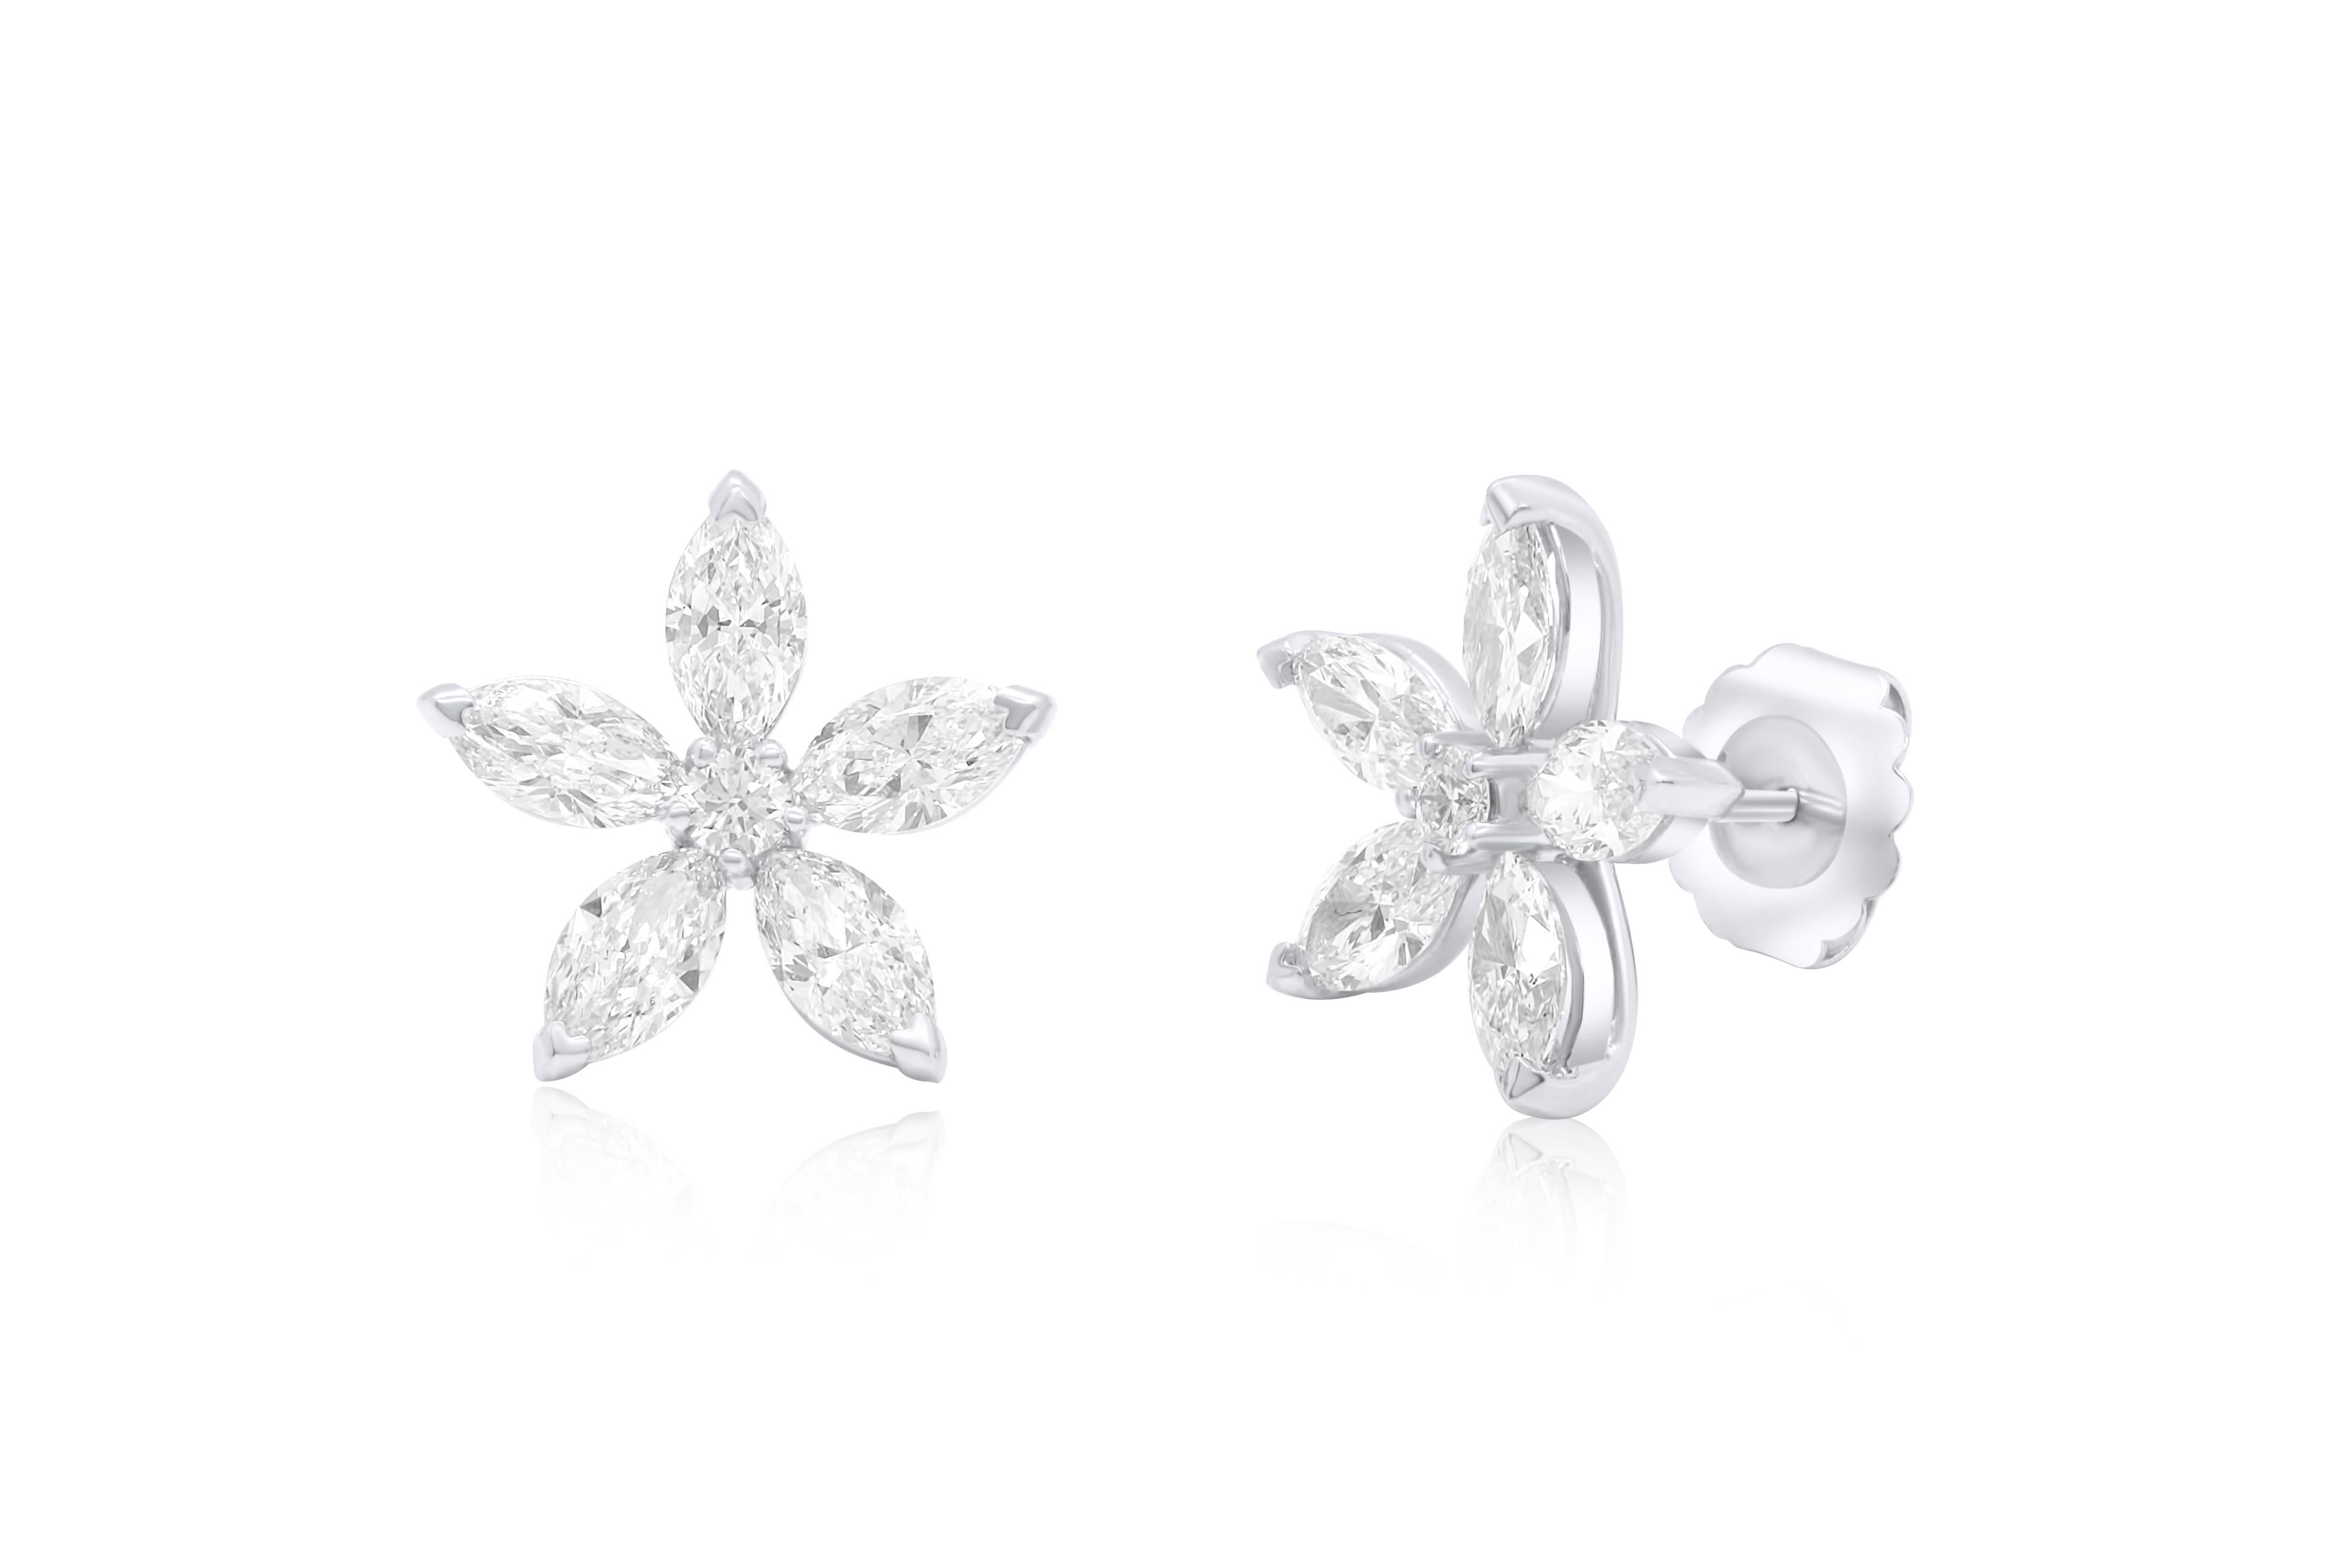 PLATINUM DIAMOND FLOWER STUDS WITH MARQUISE DIAMONDS 5.06CTS G-I VS VVS GIA,
Diana M is one-stop shop for all your jewelry shopping, carrying line of diamond rings, earrings, bracelets, necklaces, and other fine jewelry.
We create our jewelry from